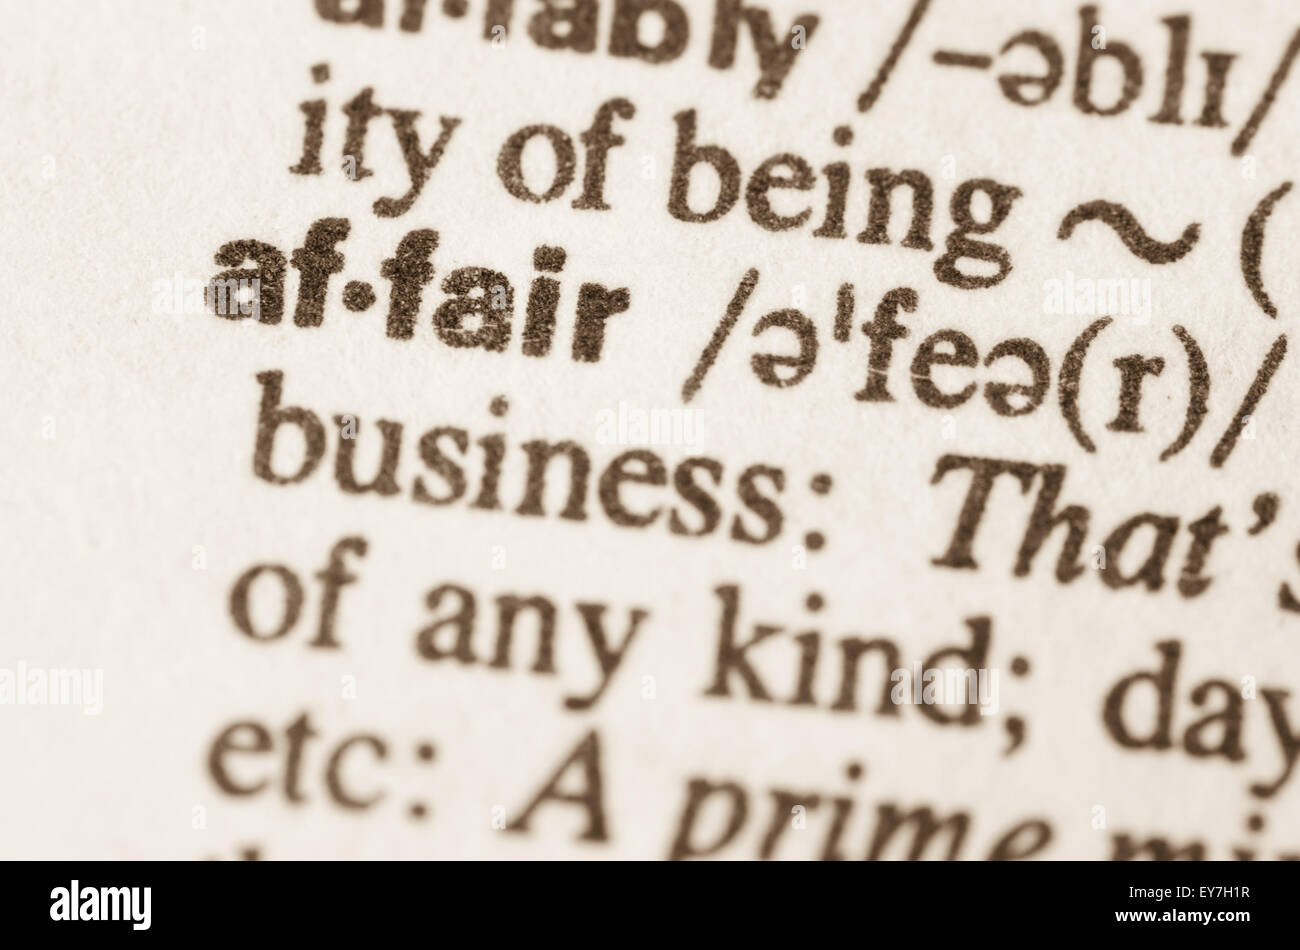 Definition of word affair in dictionary Stock Photo